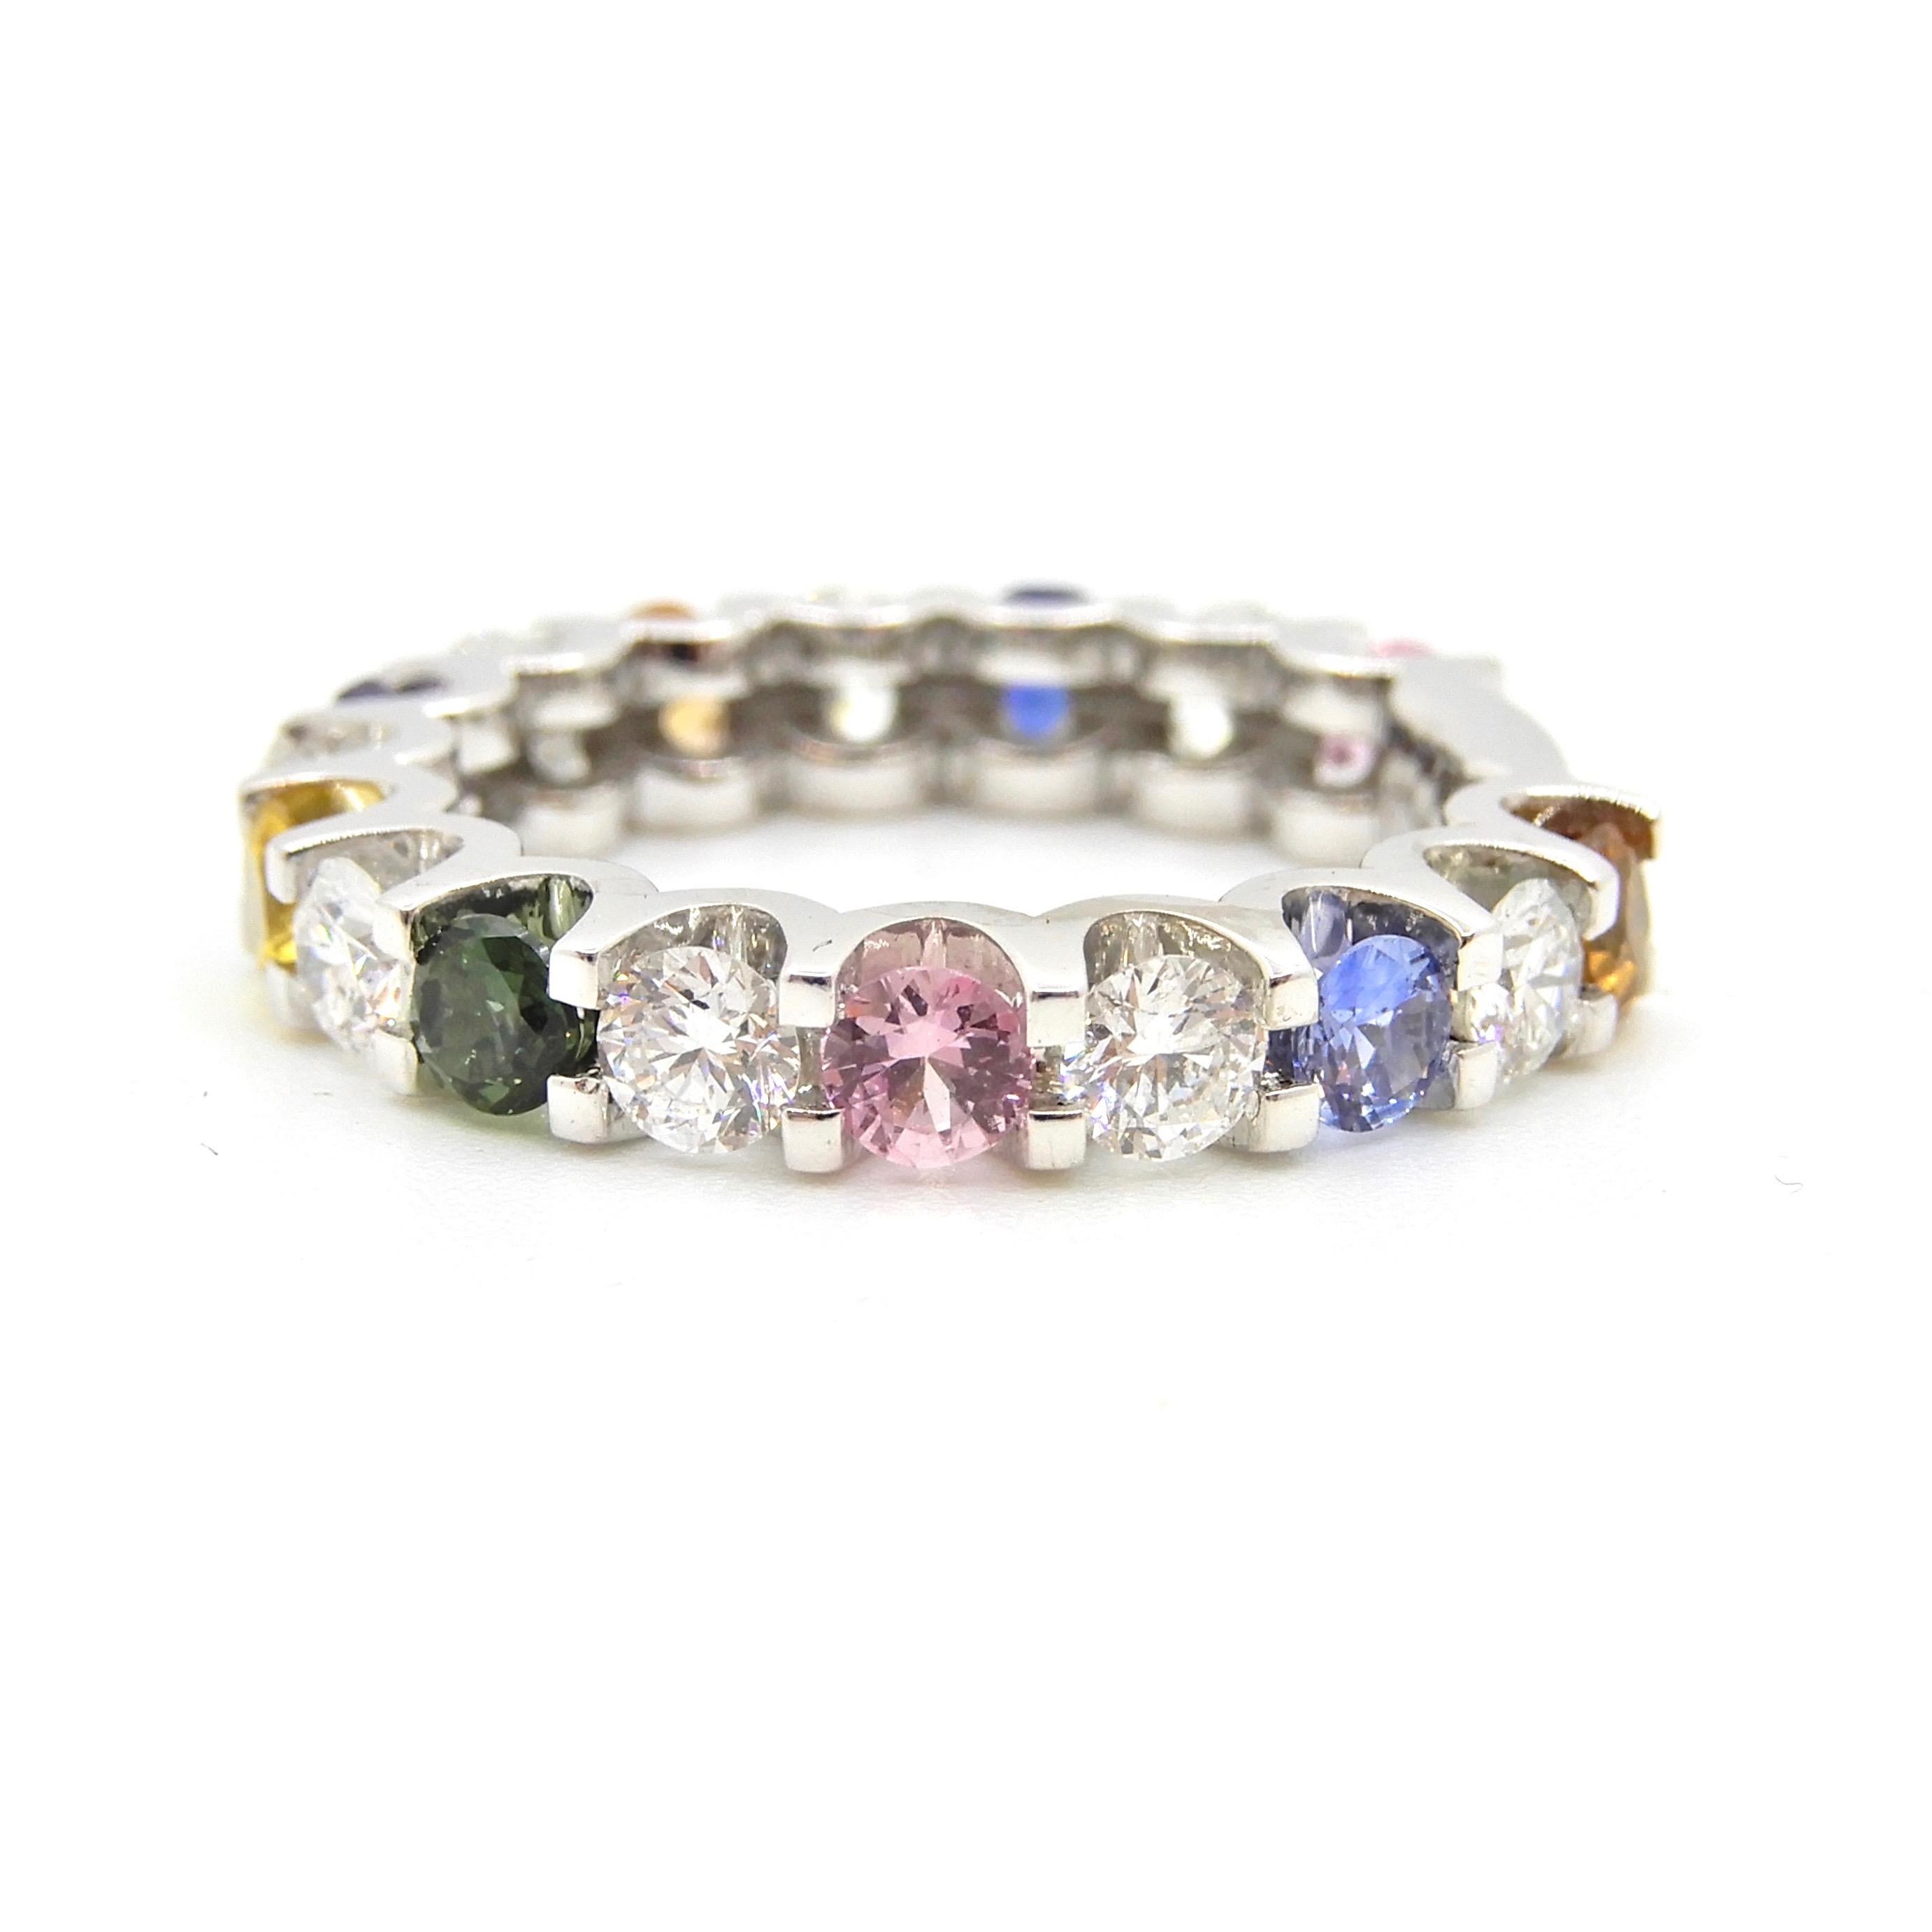 The Petra Rainbow Sapphire and Diamond Eternity Band Ring is a striking piece measuring approximately 3.39mm in width. The ring features one row of 17 x scalloped claw settings alternating 8 x 3.02-3.09mm round brilliant cut Diamonds of G colour SI